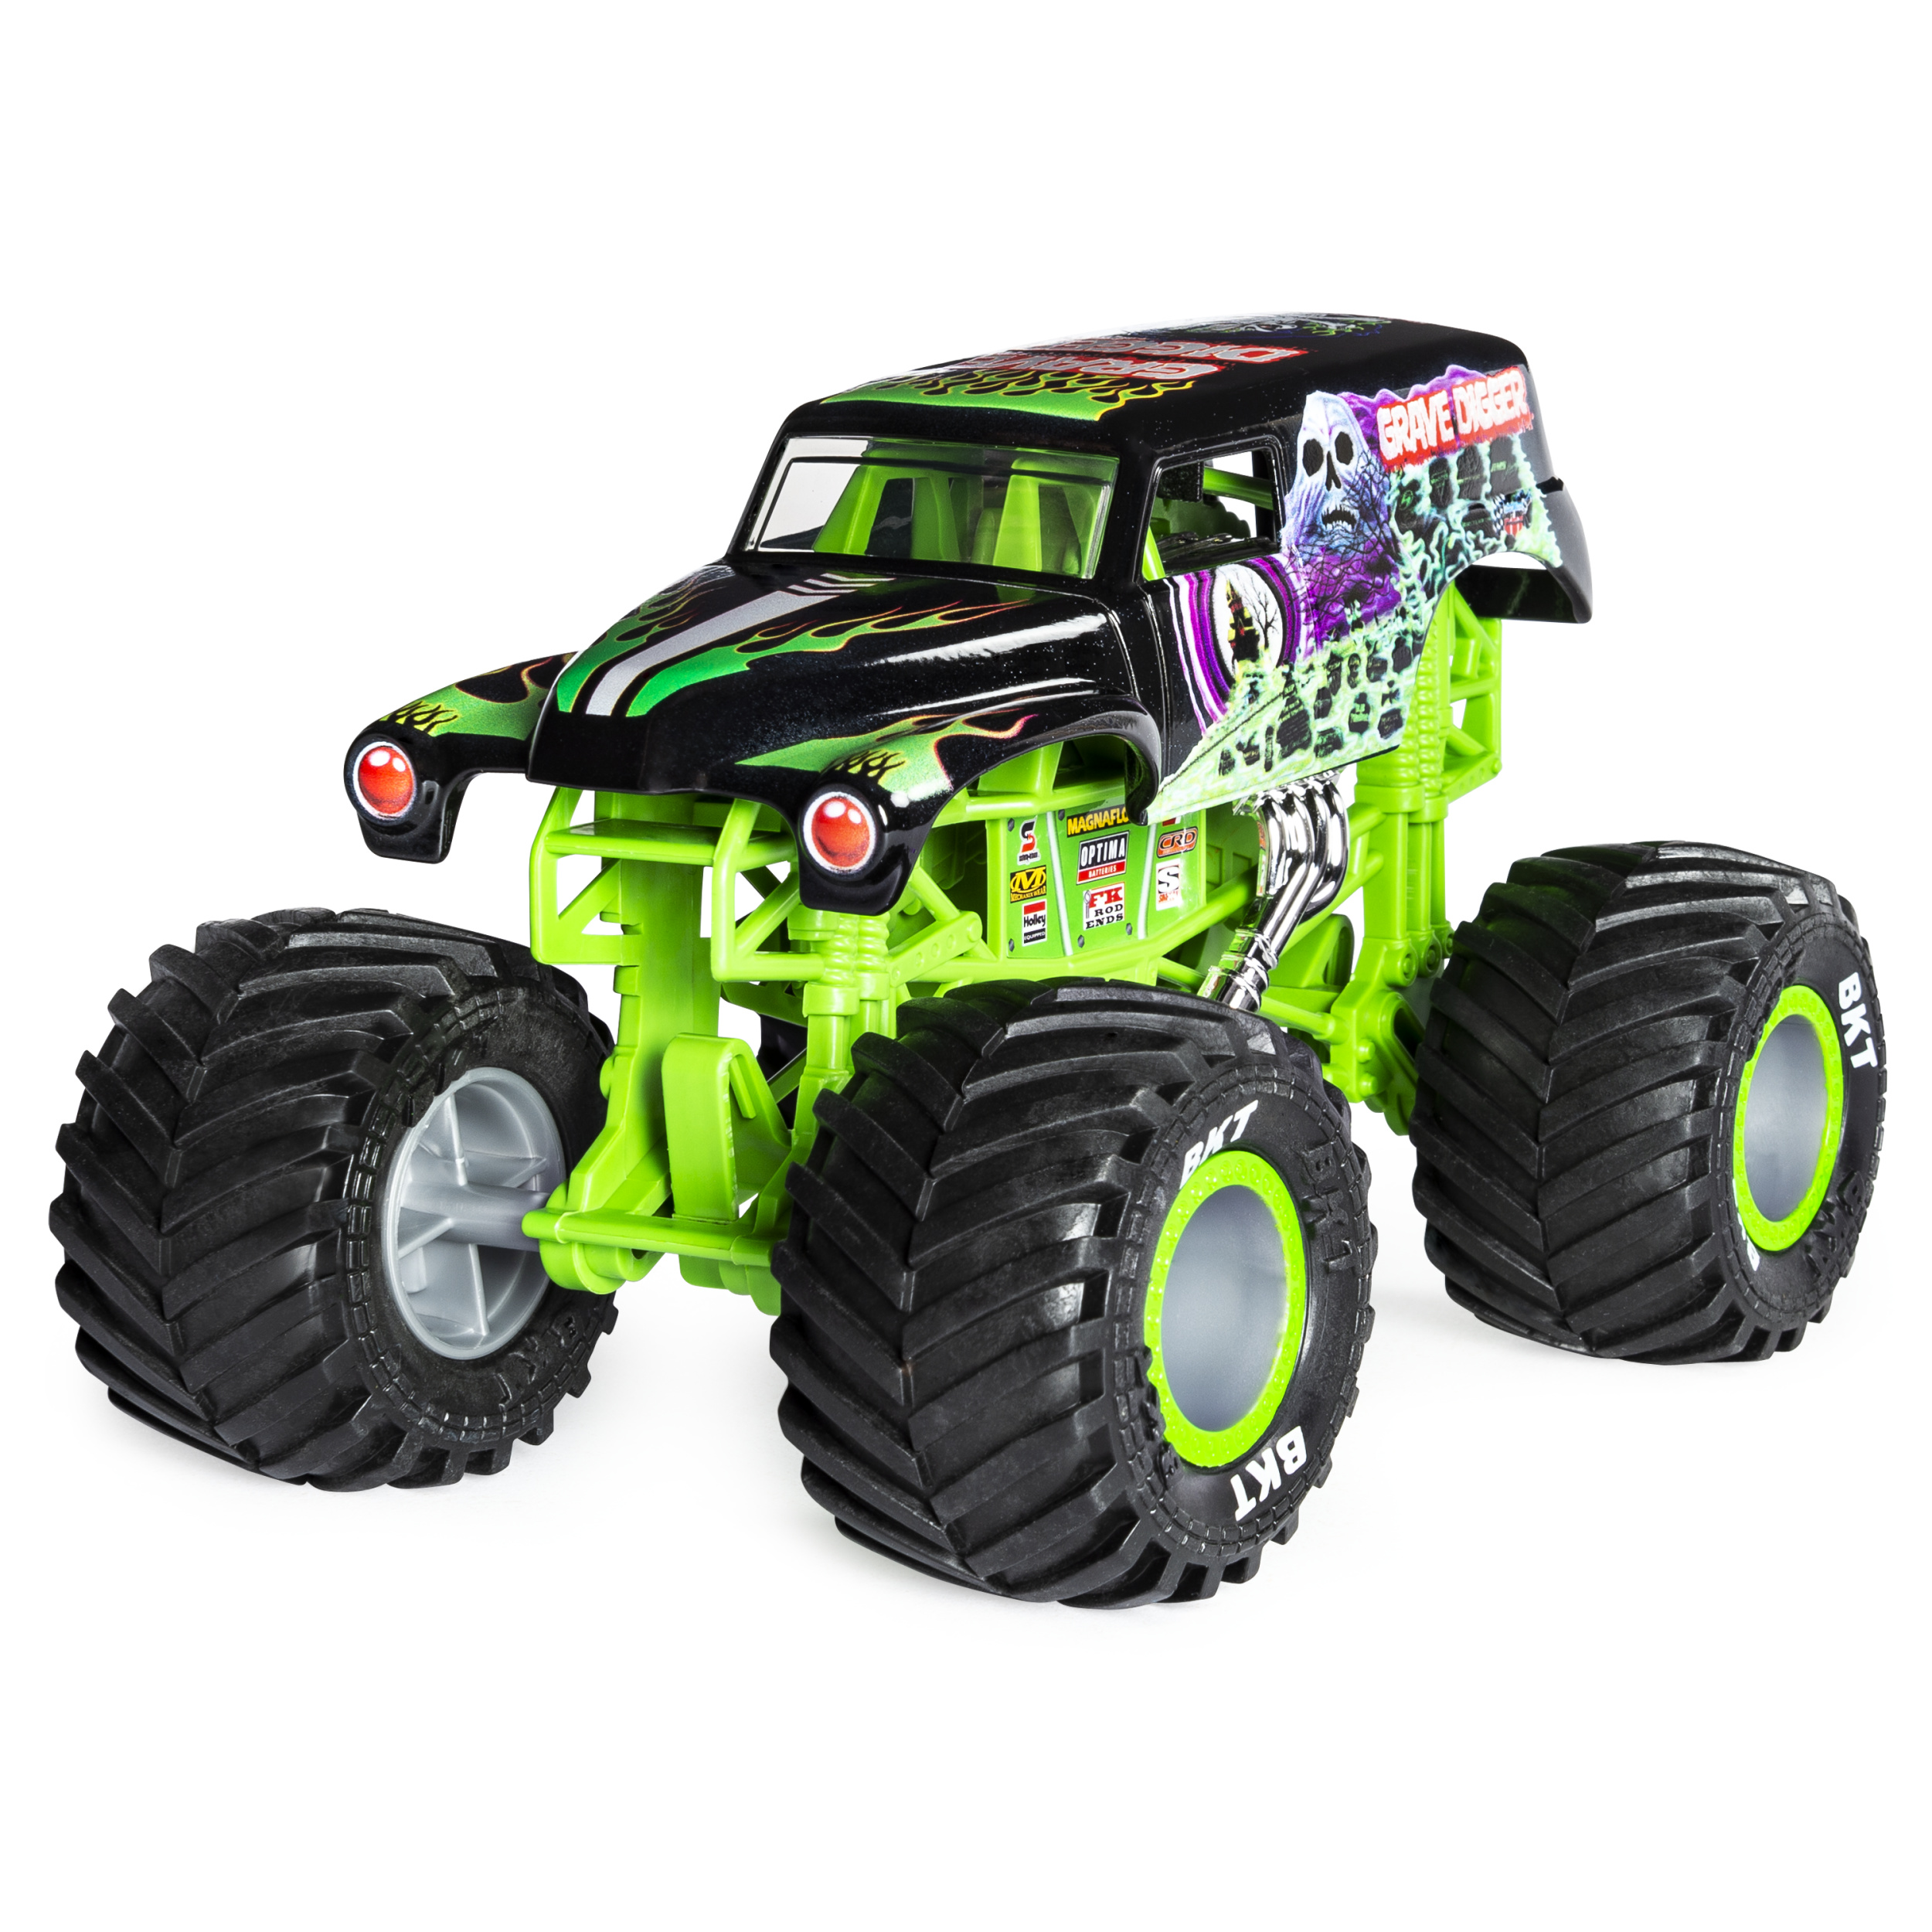 Monster Jam, Official Grave Digger Monster Truck, Die-Cast Vehicle, 1:24 Scale - image 3 of 5